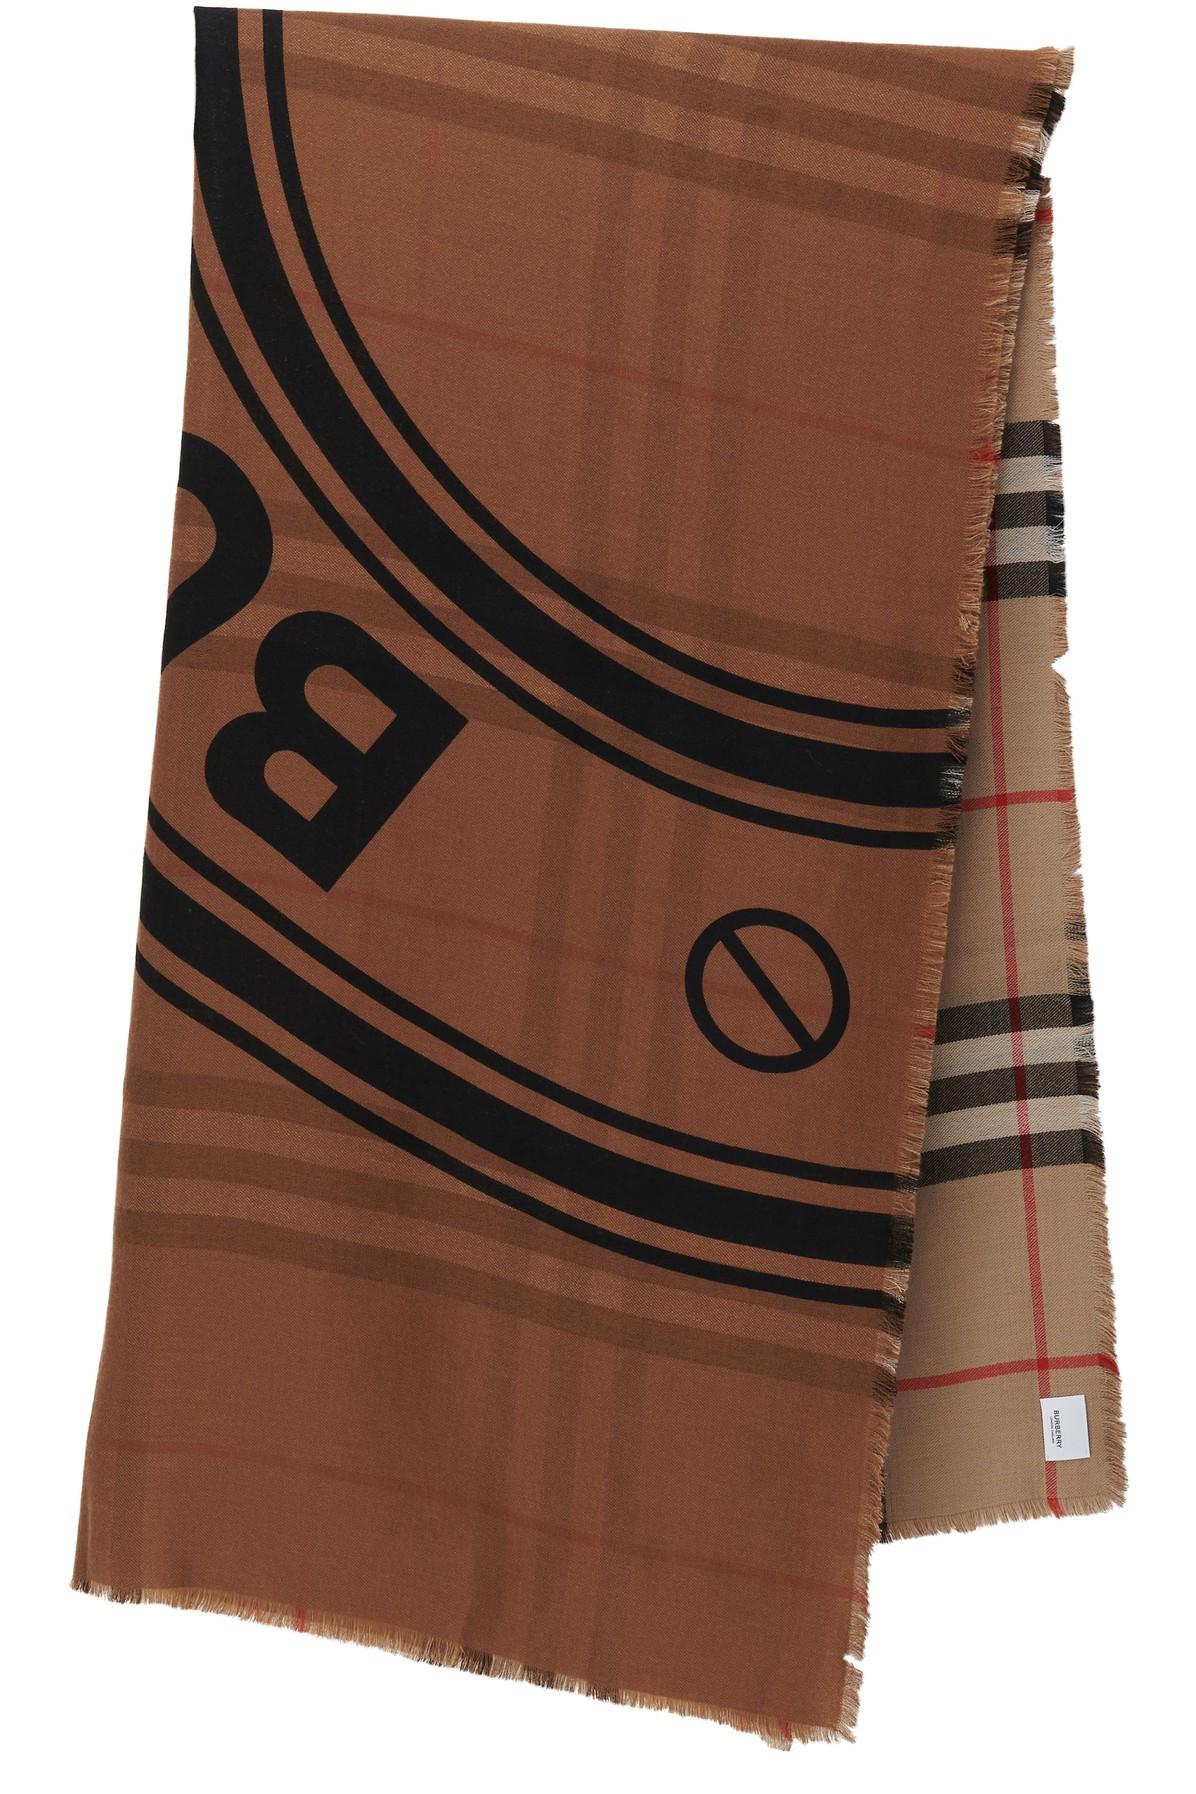 BURBERRY Reversible Check And Monogram Cashmere Scarf